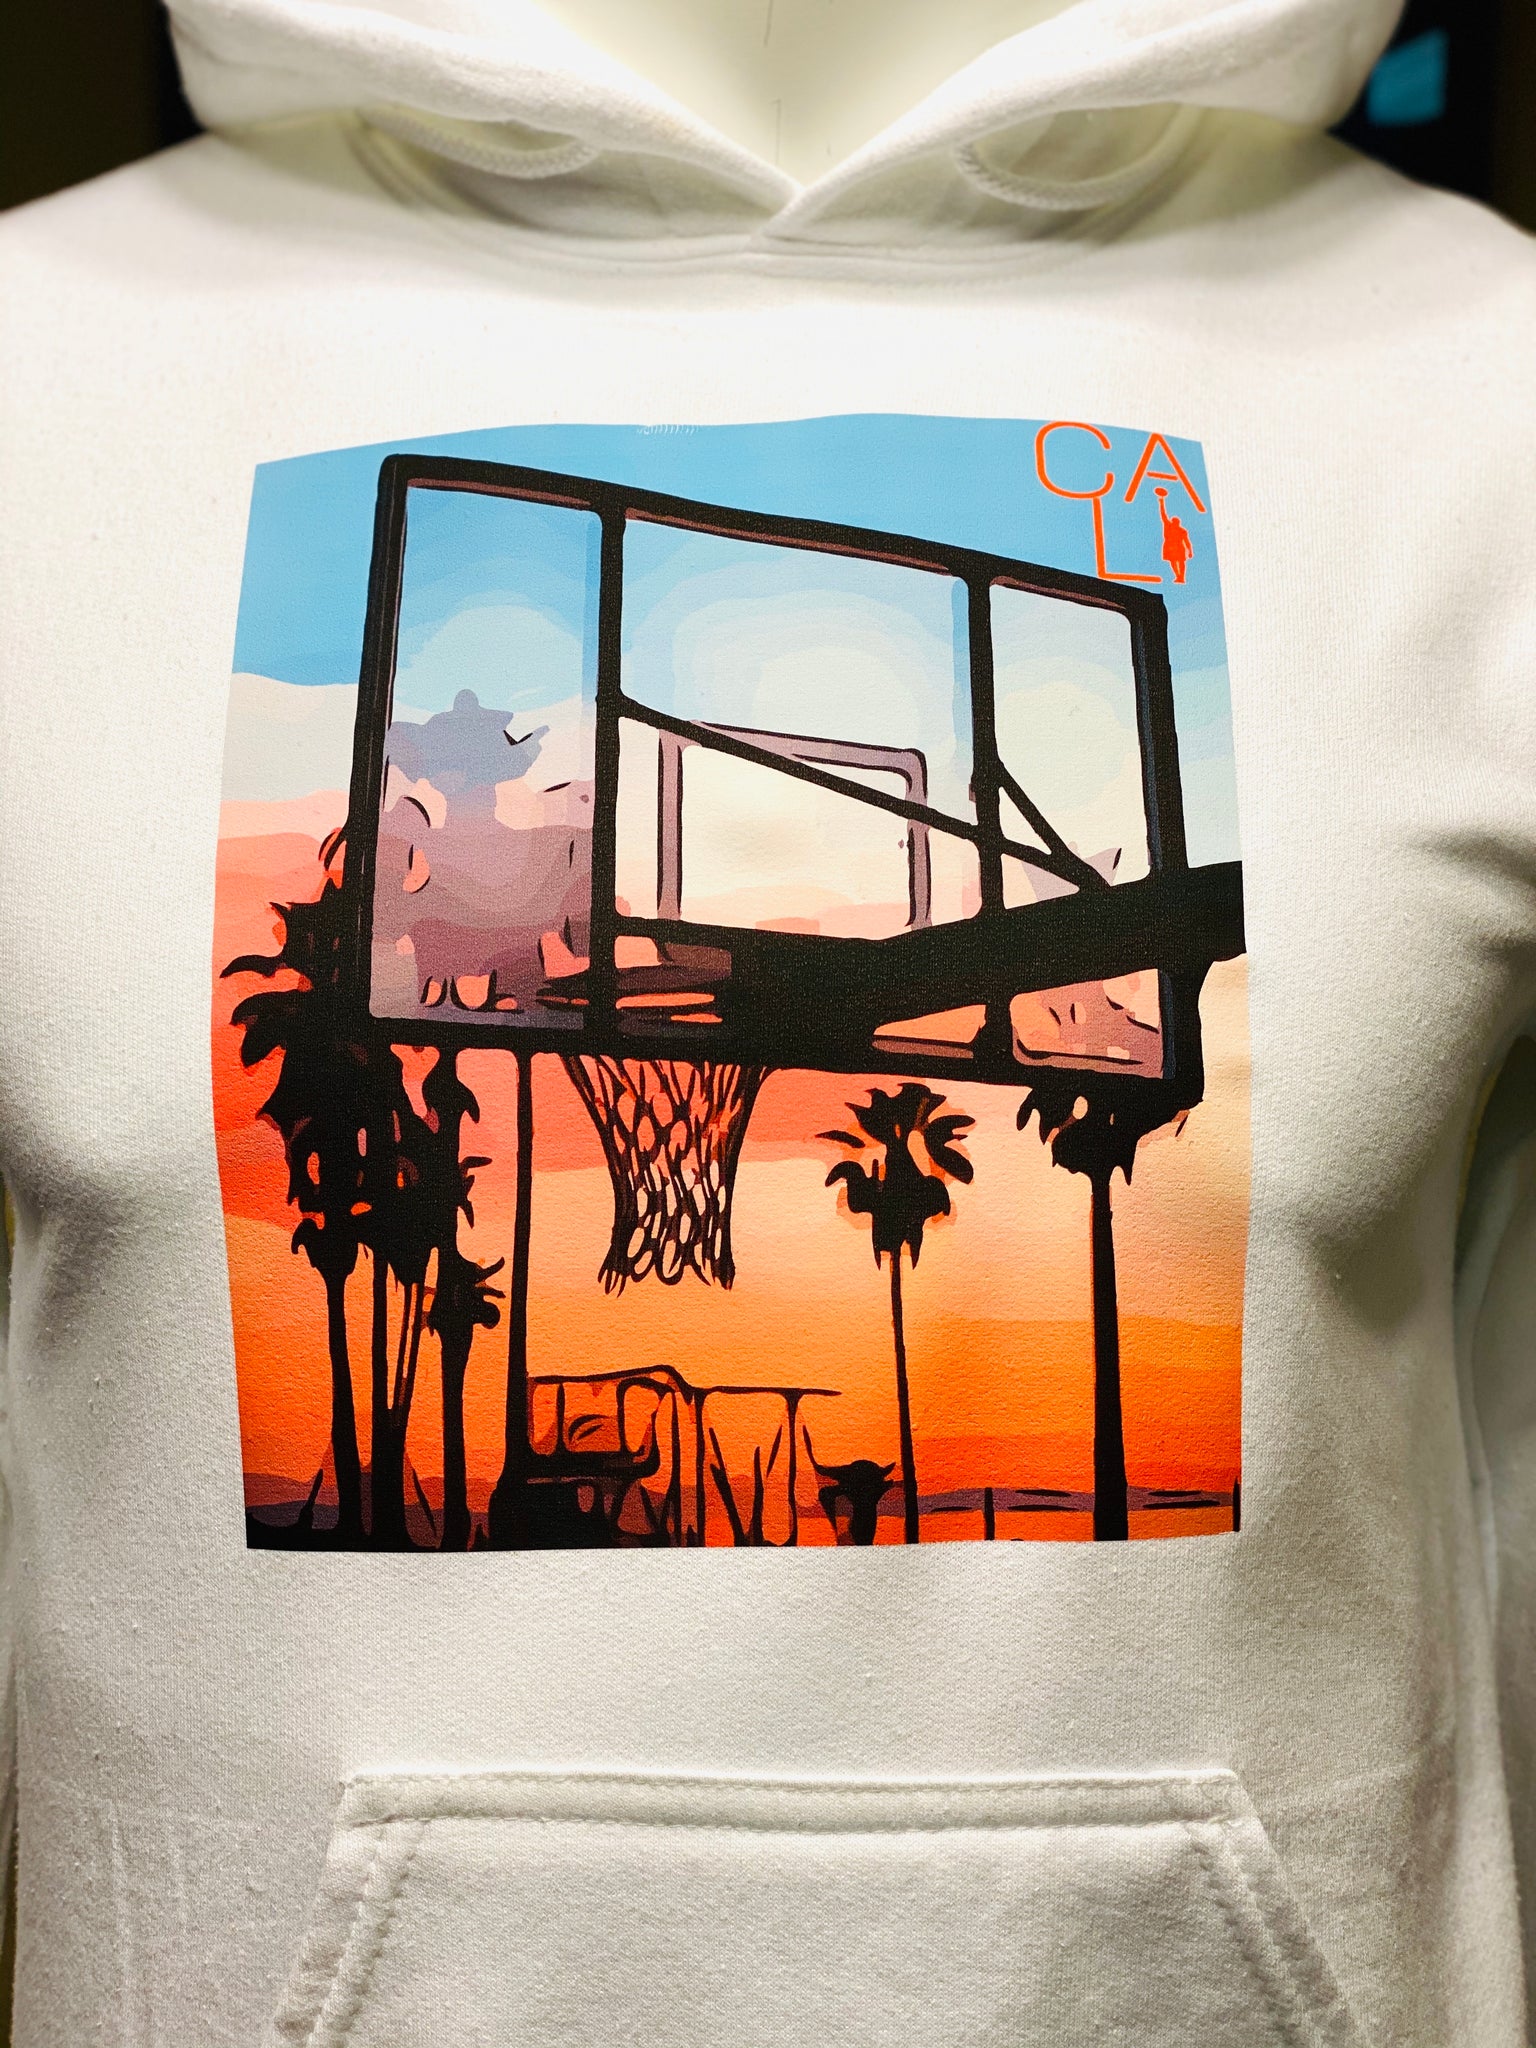 BALLIN' AT THE BEACH (Cali) HOODIE by LABCITY – LABCITY SHOP